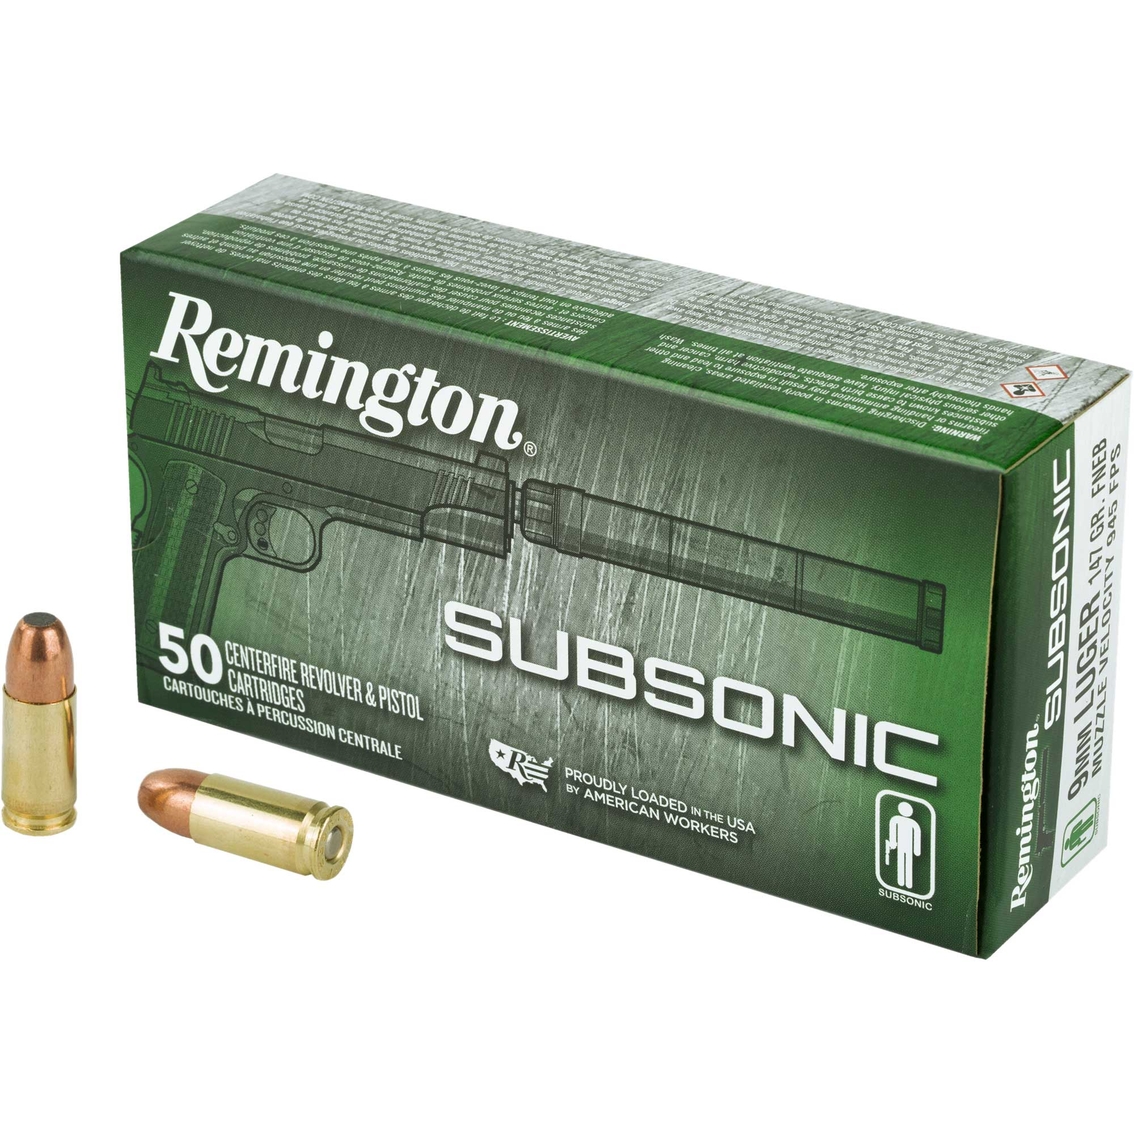 Remington Subsonic 9MM 147 Gr. Flat Nose Enclosed Bullet 50 Rounds - Image 3 of 3